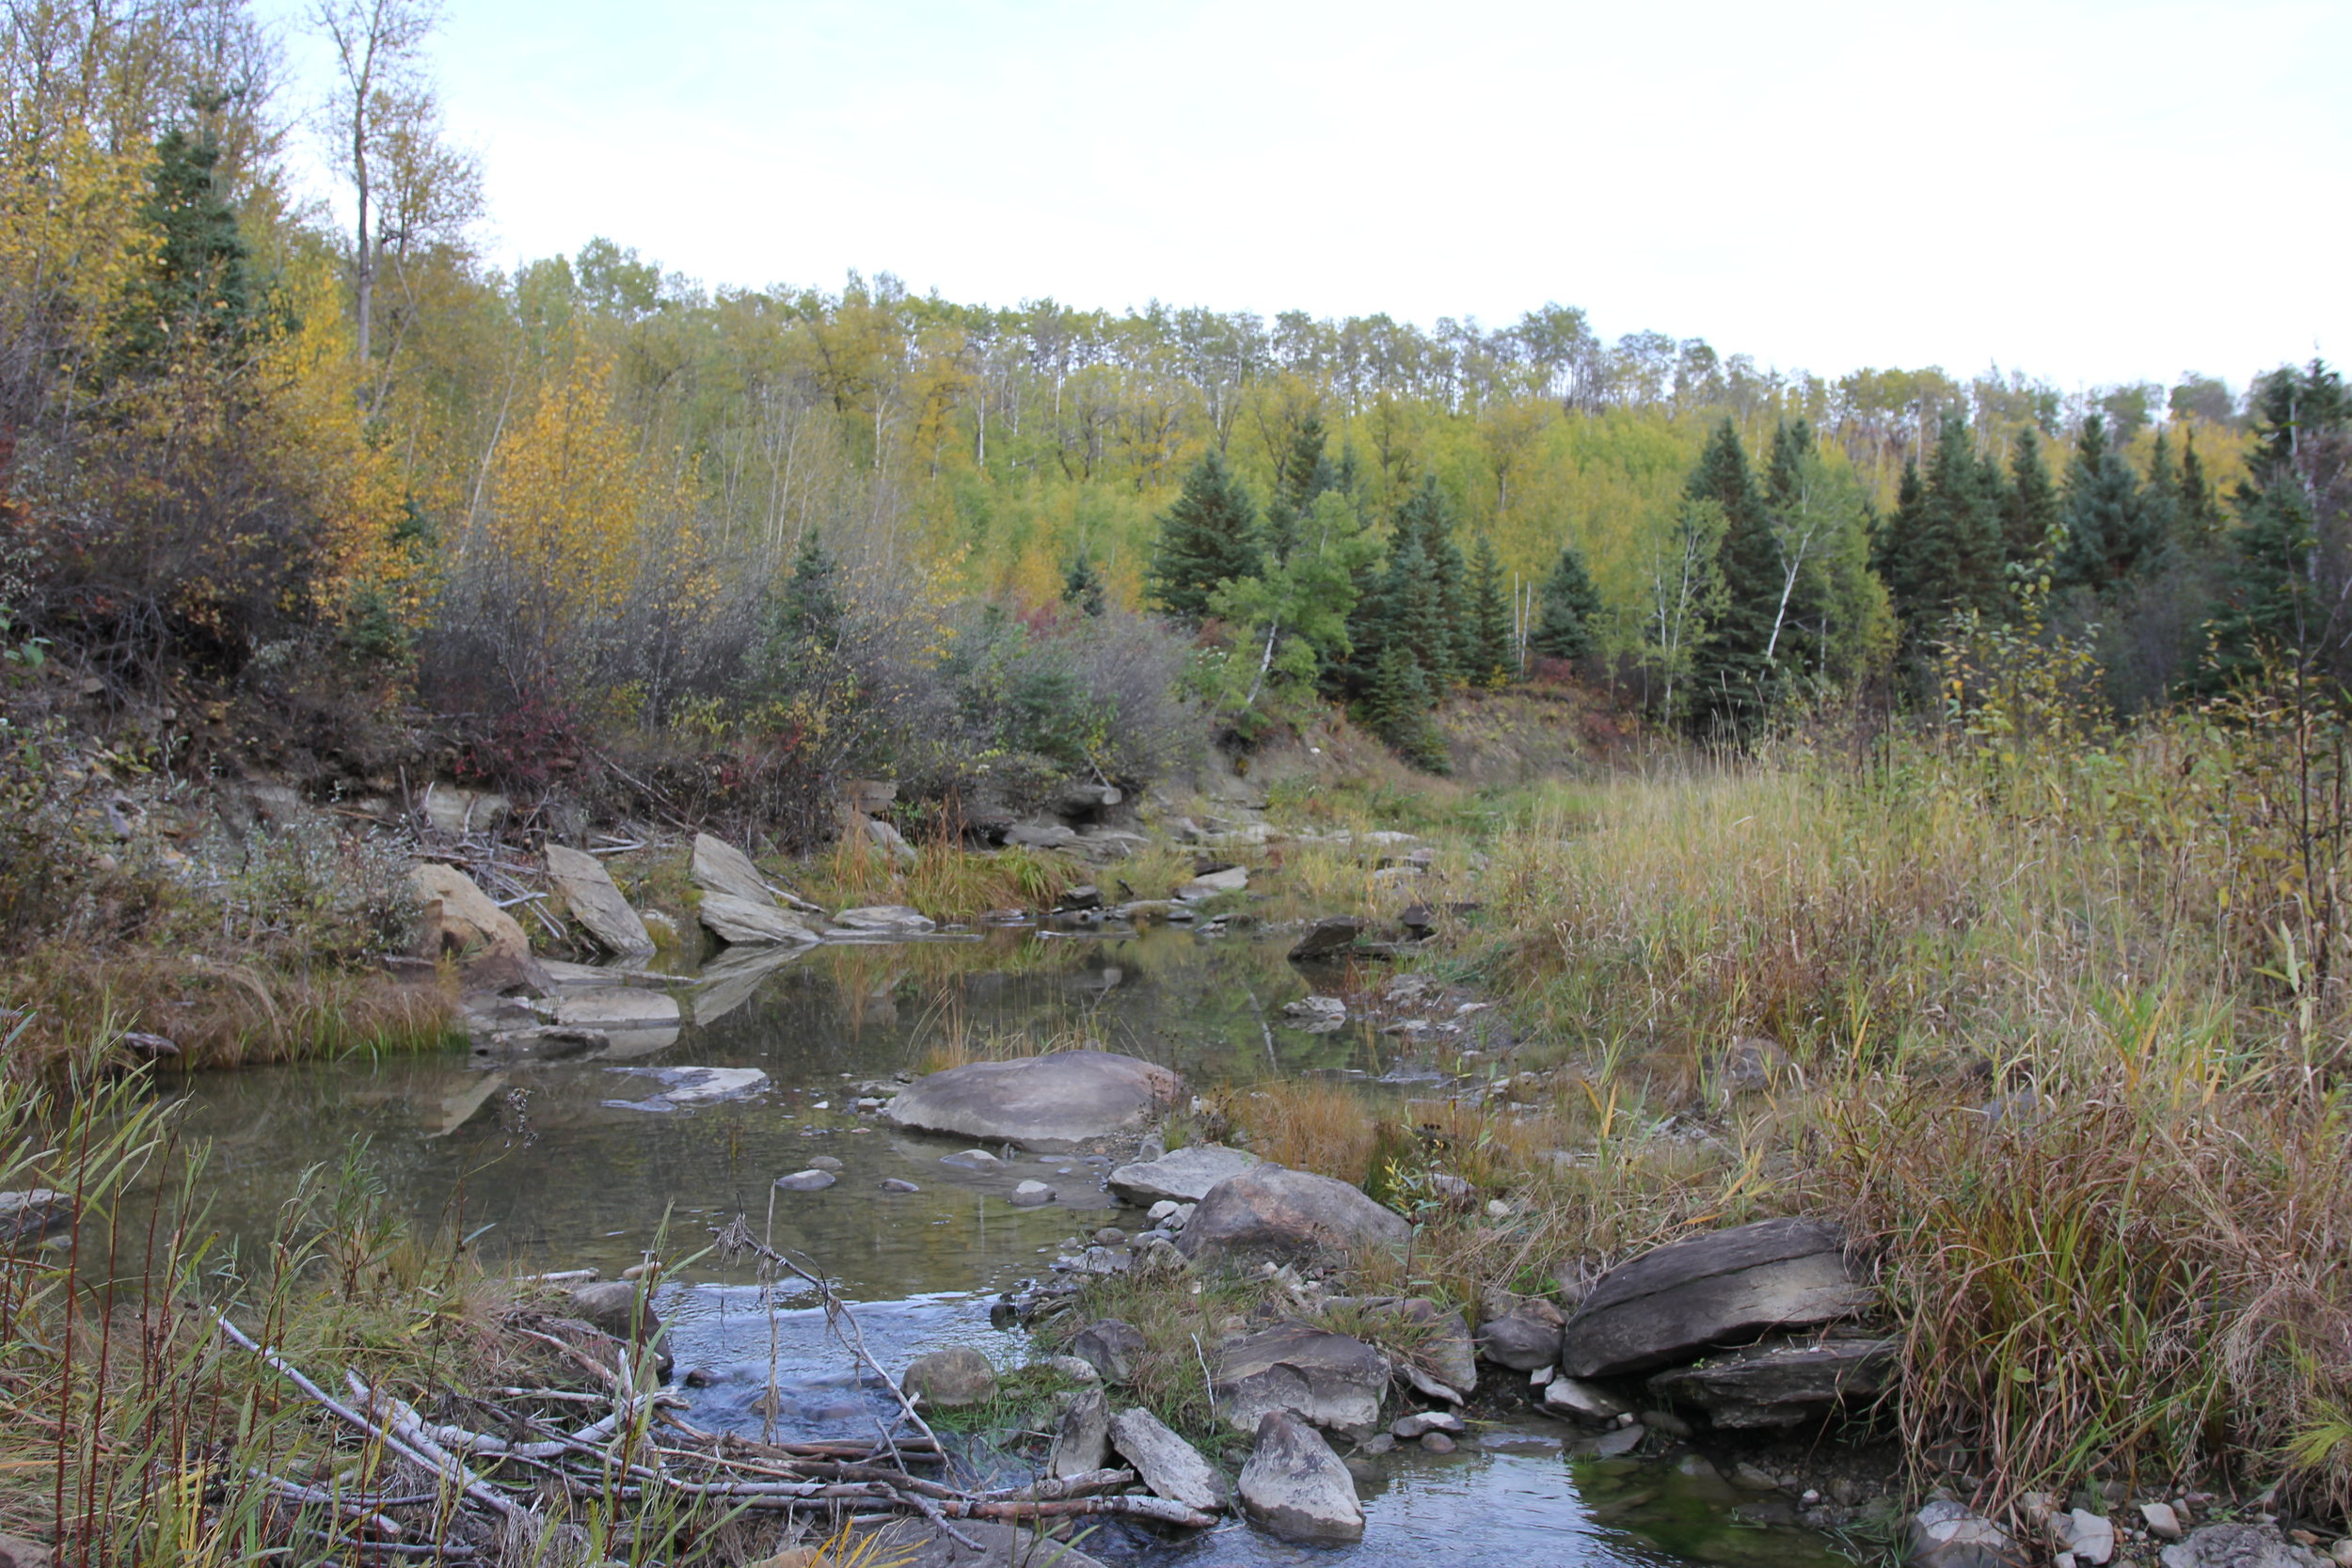 Willow Creek in Coates Conservation Lands